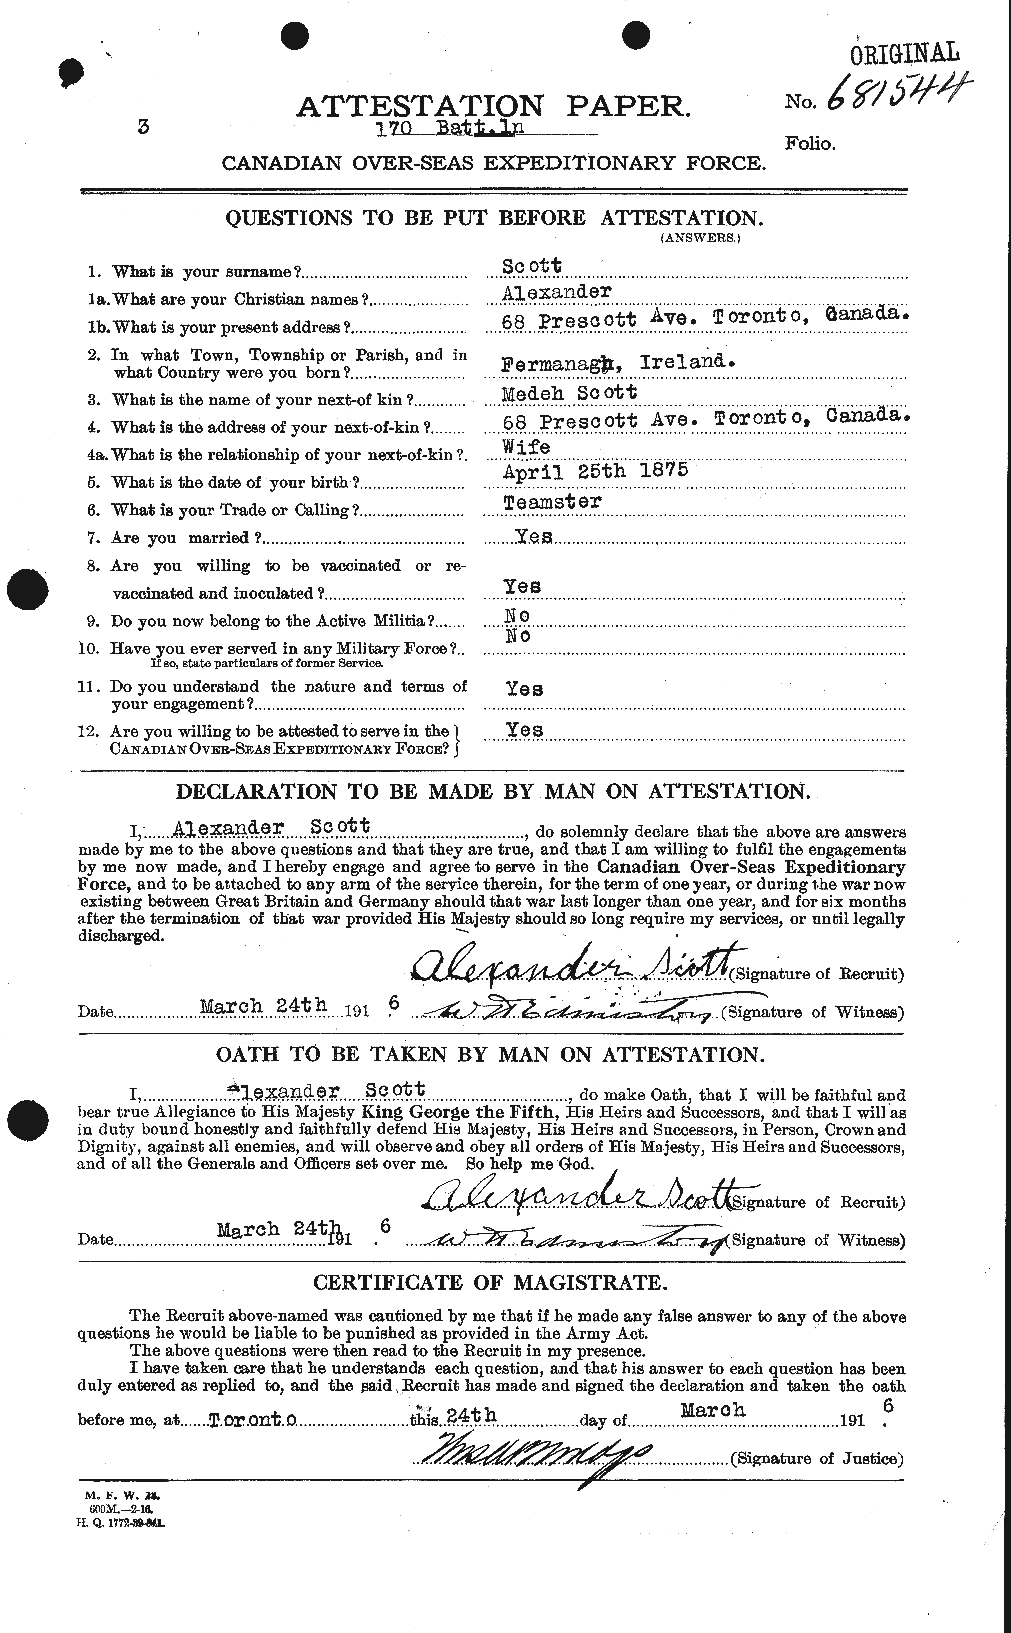 Personnel Records of the First World War - CEF 086615a